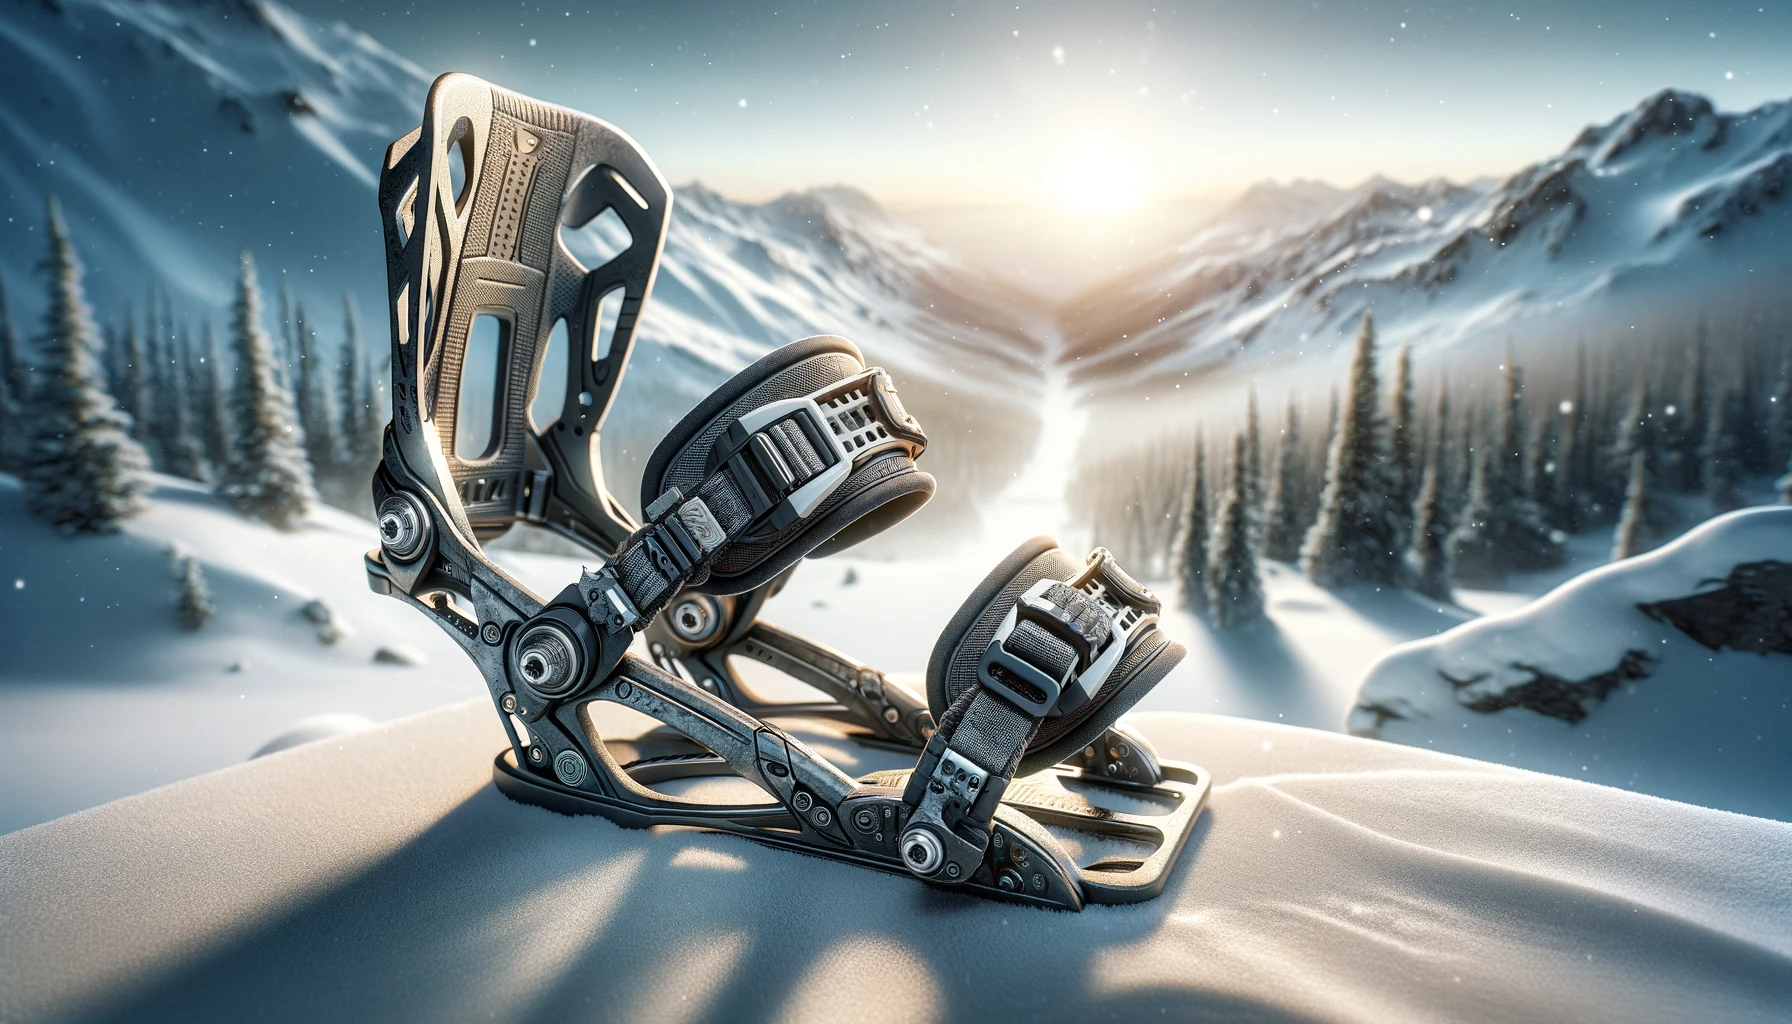 Close-up of a snowboard binding, highlighting its detailed design and sturdy build against a blurred background, emphasizing its quality and functionality.